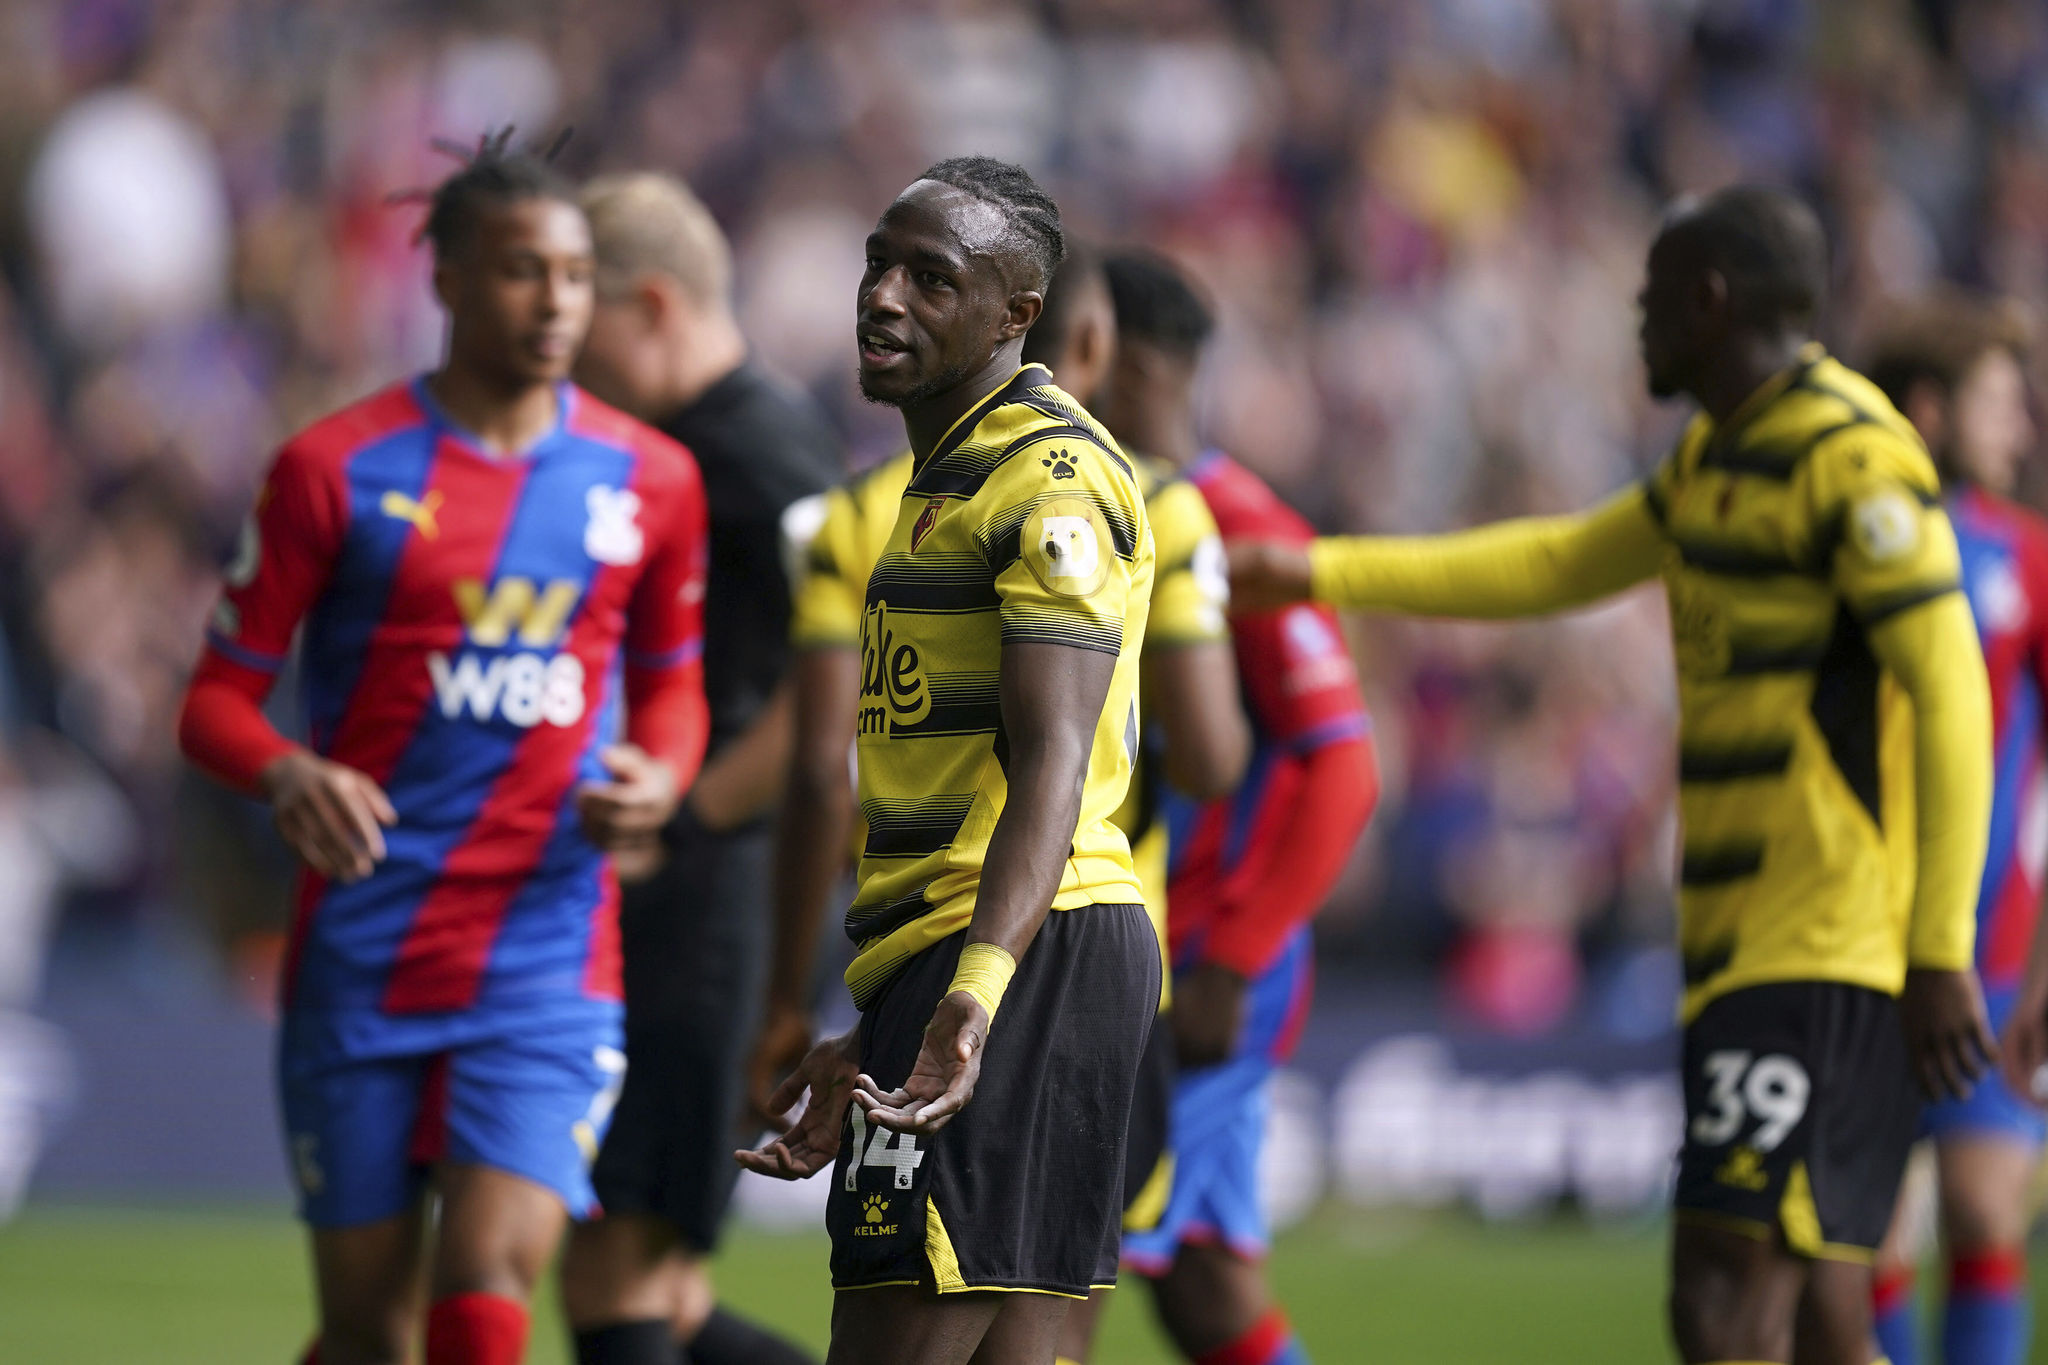 Watford's Hassane Kamara reacts to being shown a red card.